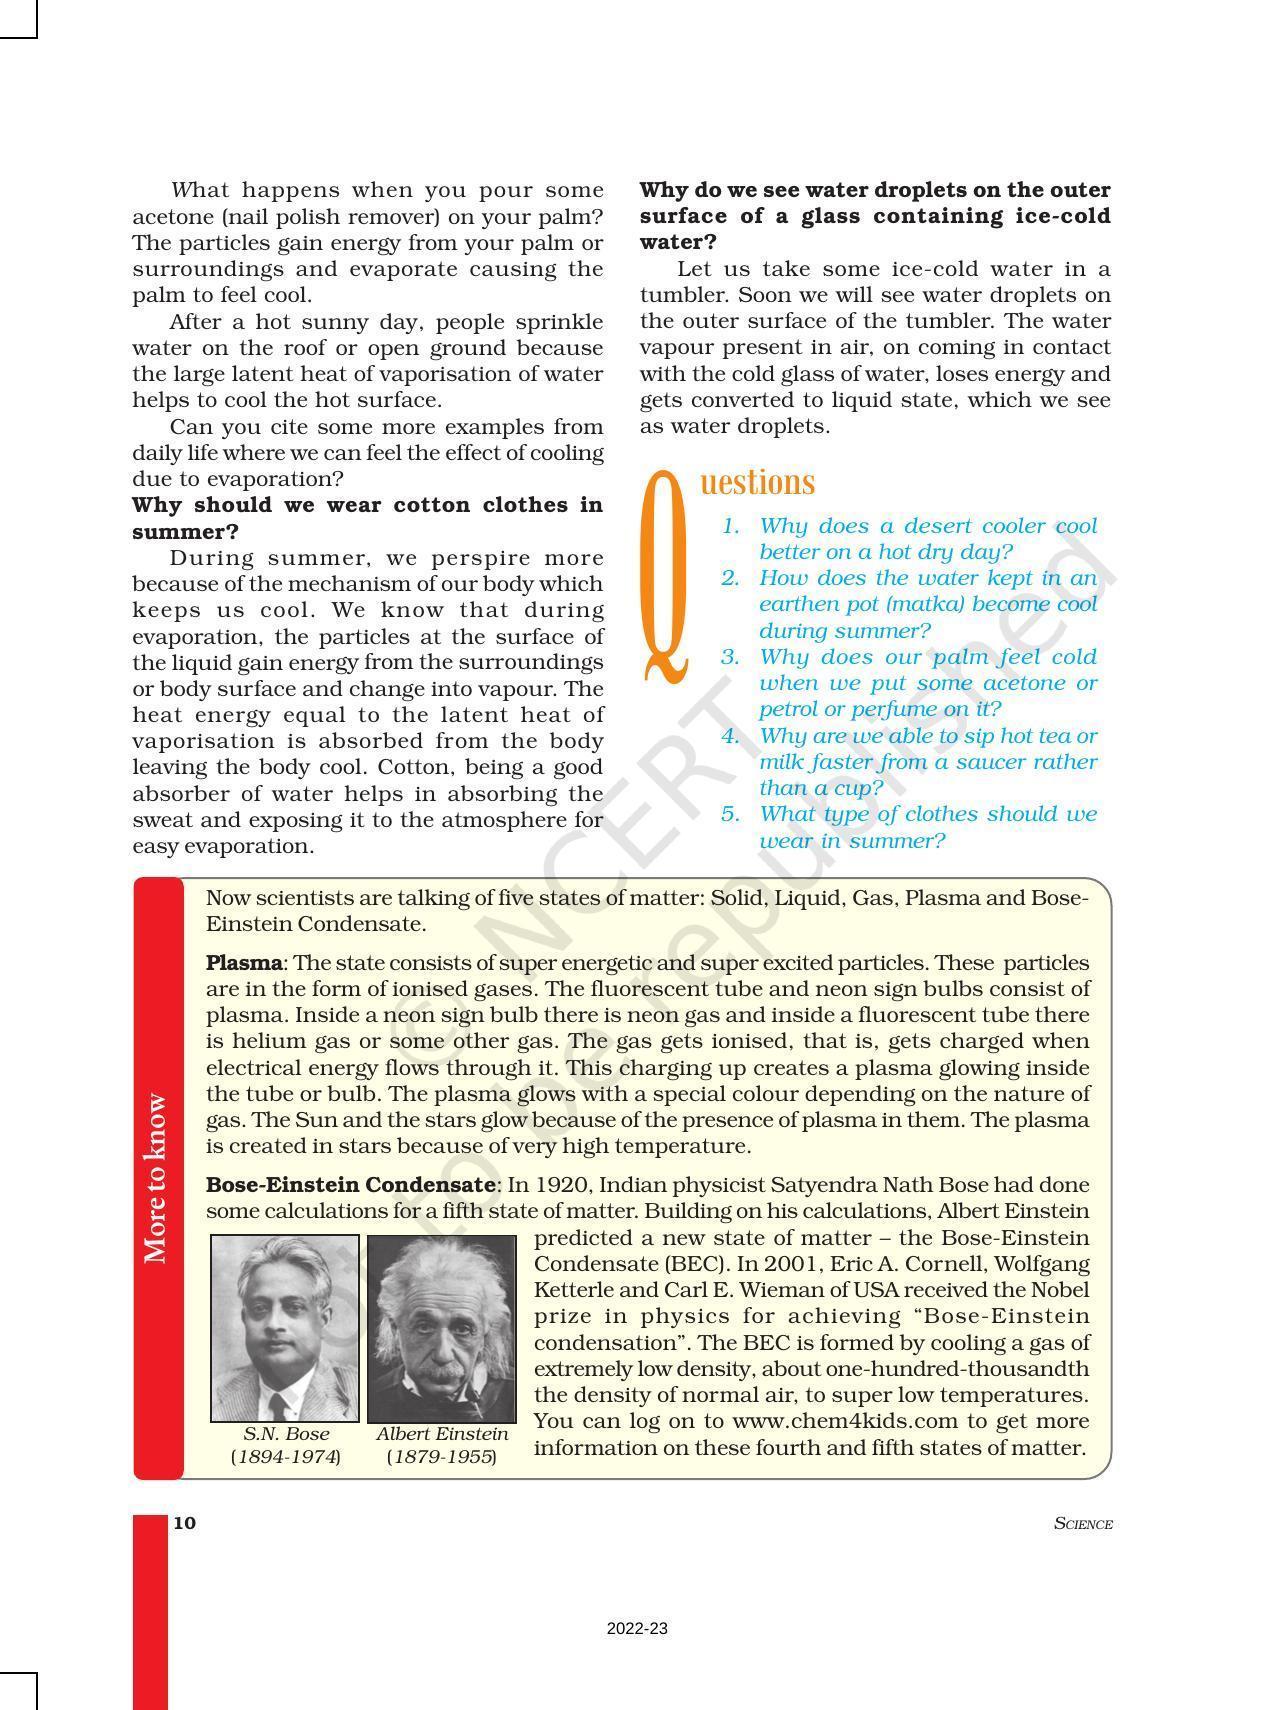 NCERT Book for Class 9 Science Chapter 1 Matter in Our Surroundings - Page 10